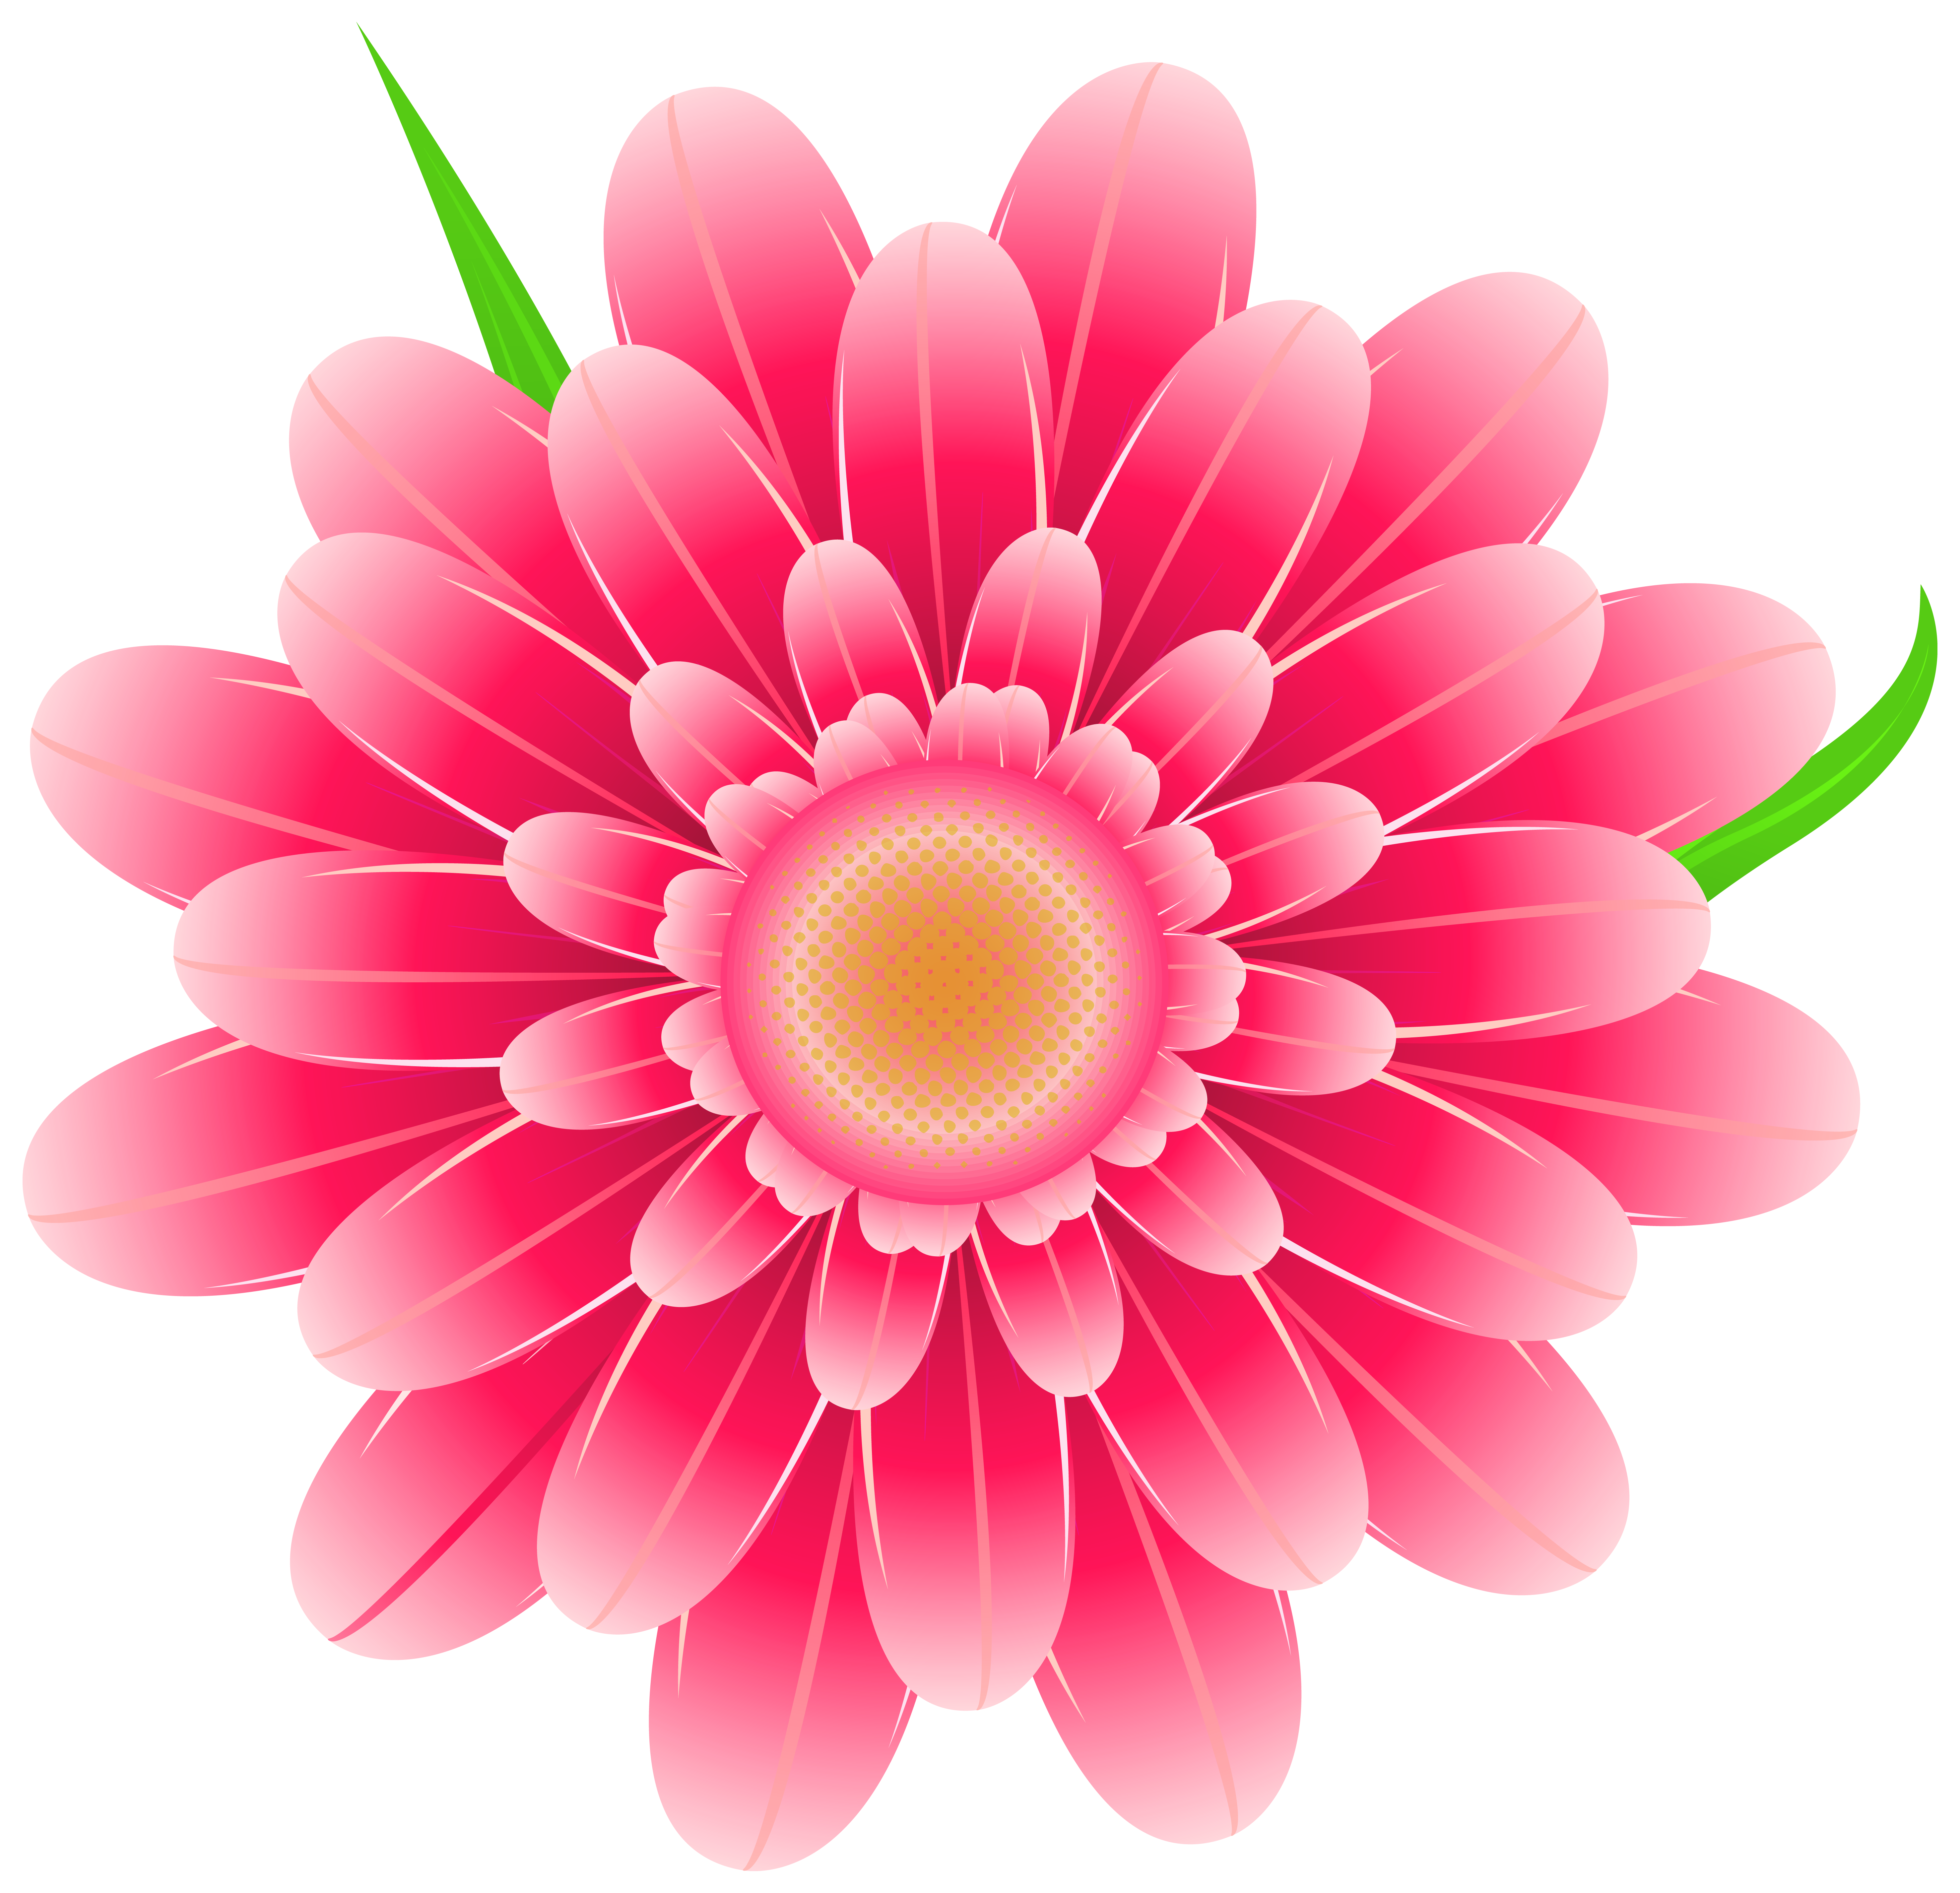 flower clipart with transparent background - photo #10